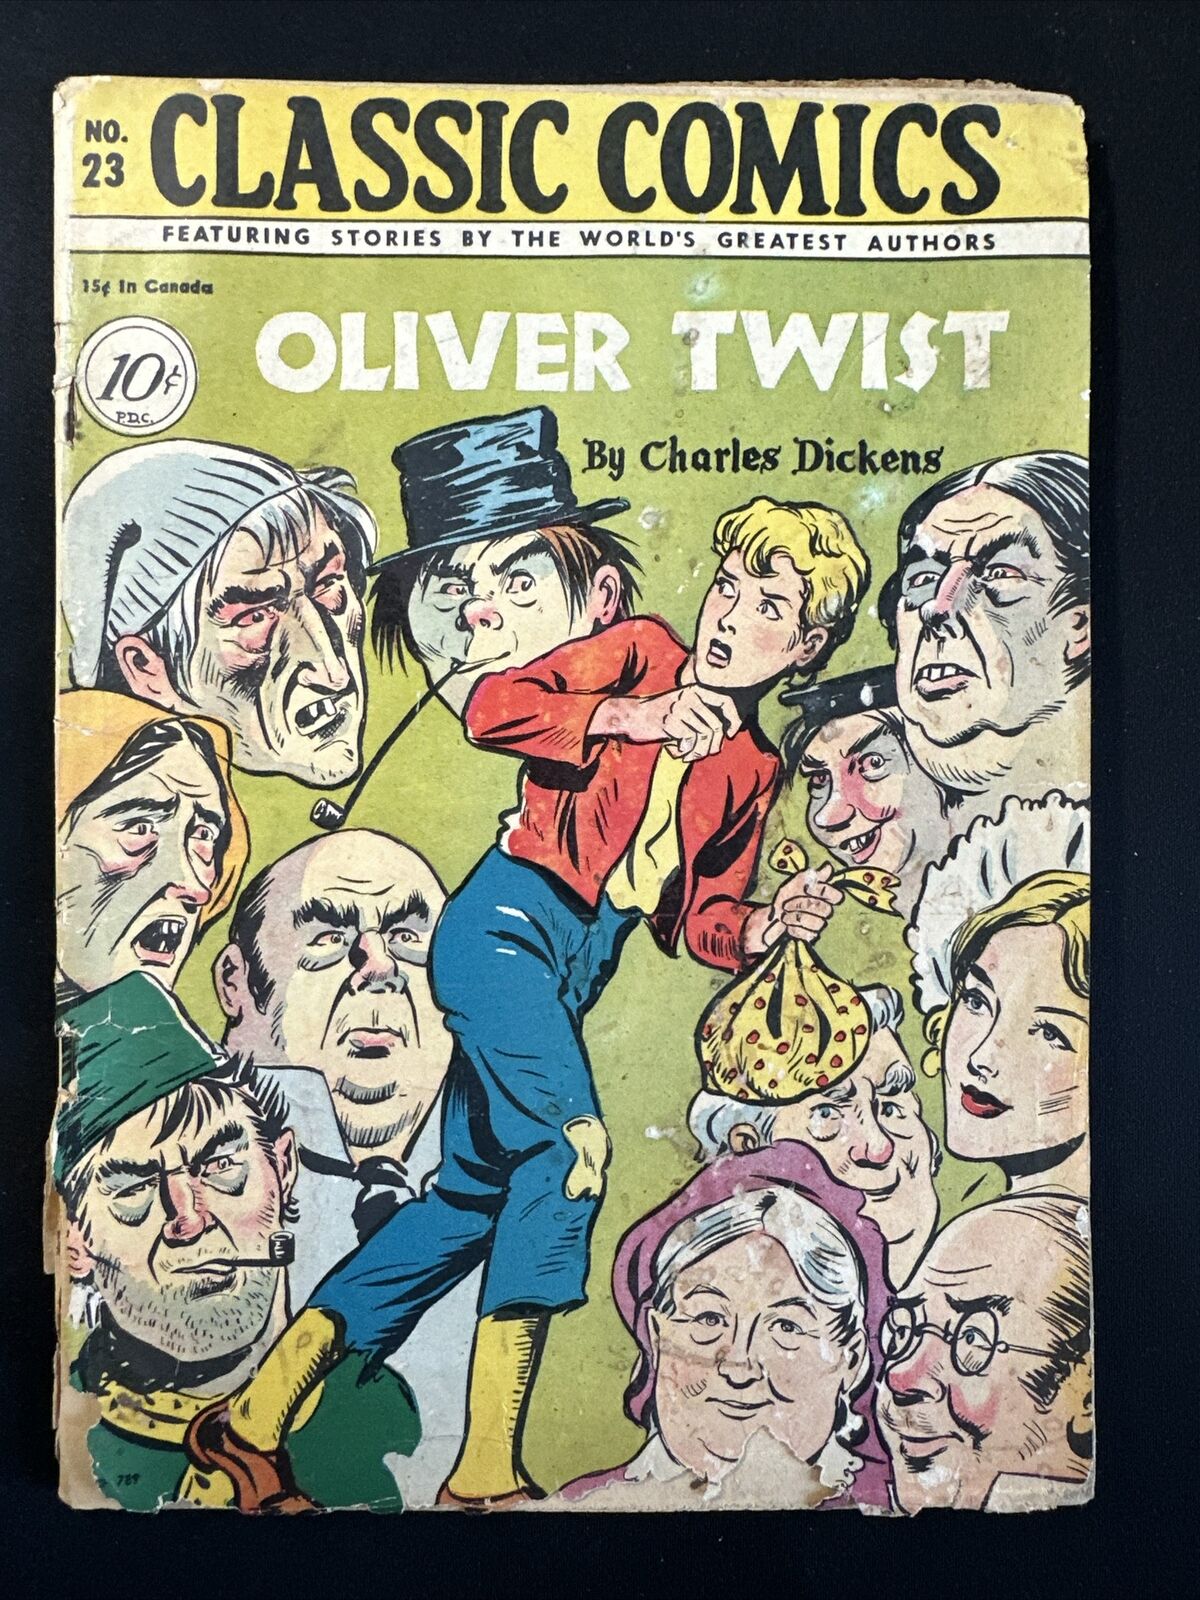 Oliver Twist #23 1st Edition Classic Illustrated Comics HRN 23 Golden Age Fair